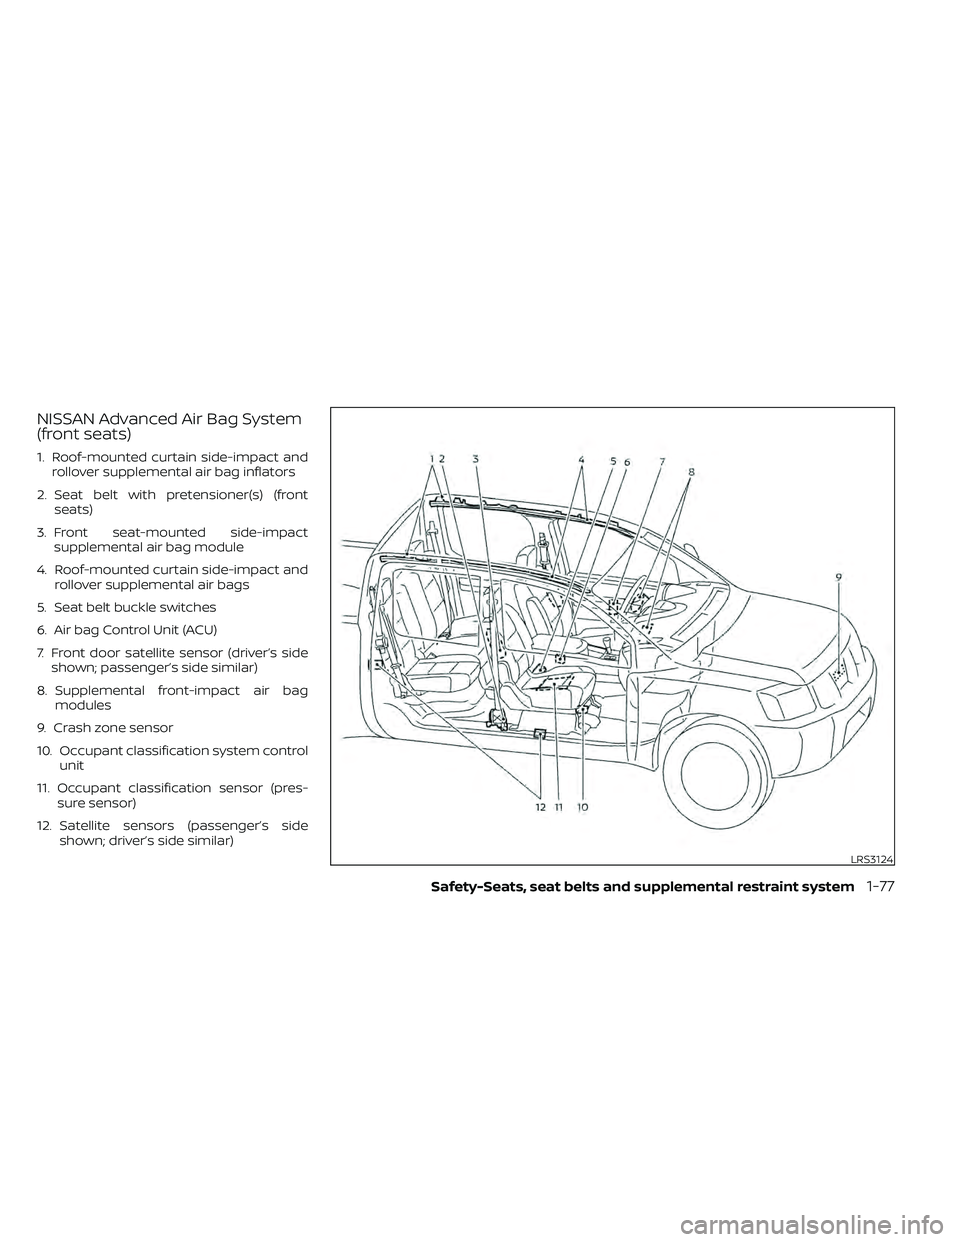 NISSAN FRONTIER 2020  Owner´s Manual NISSAN Advanced Air Bag System
(front seats)
1. Roof-mounted curtain side-impact androllover supplemental air bag inflators
2. Seat belt with pretensioner(s) (front seats)
3. Front seat-mounted side-i